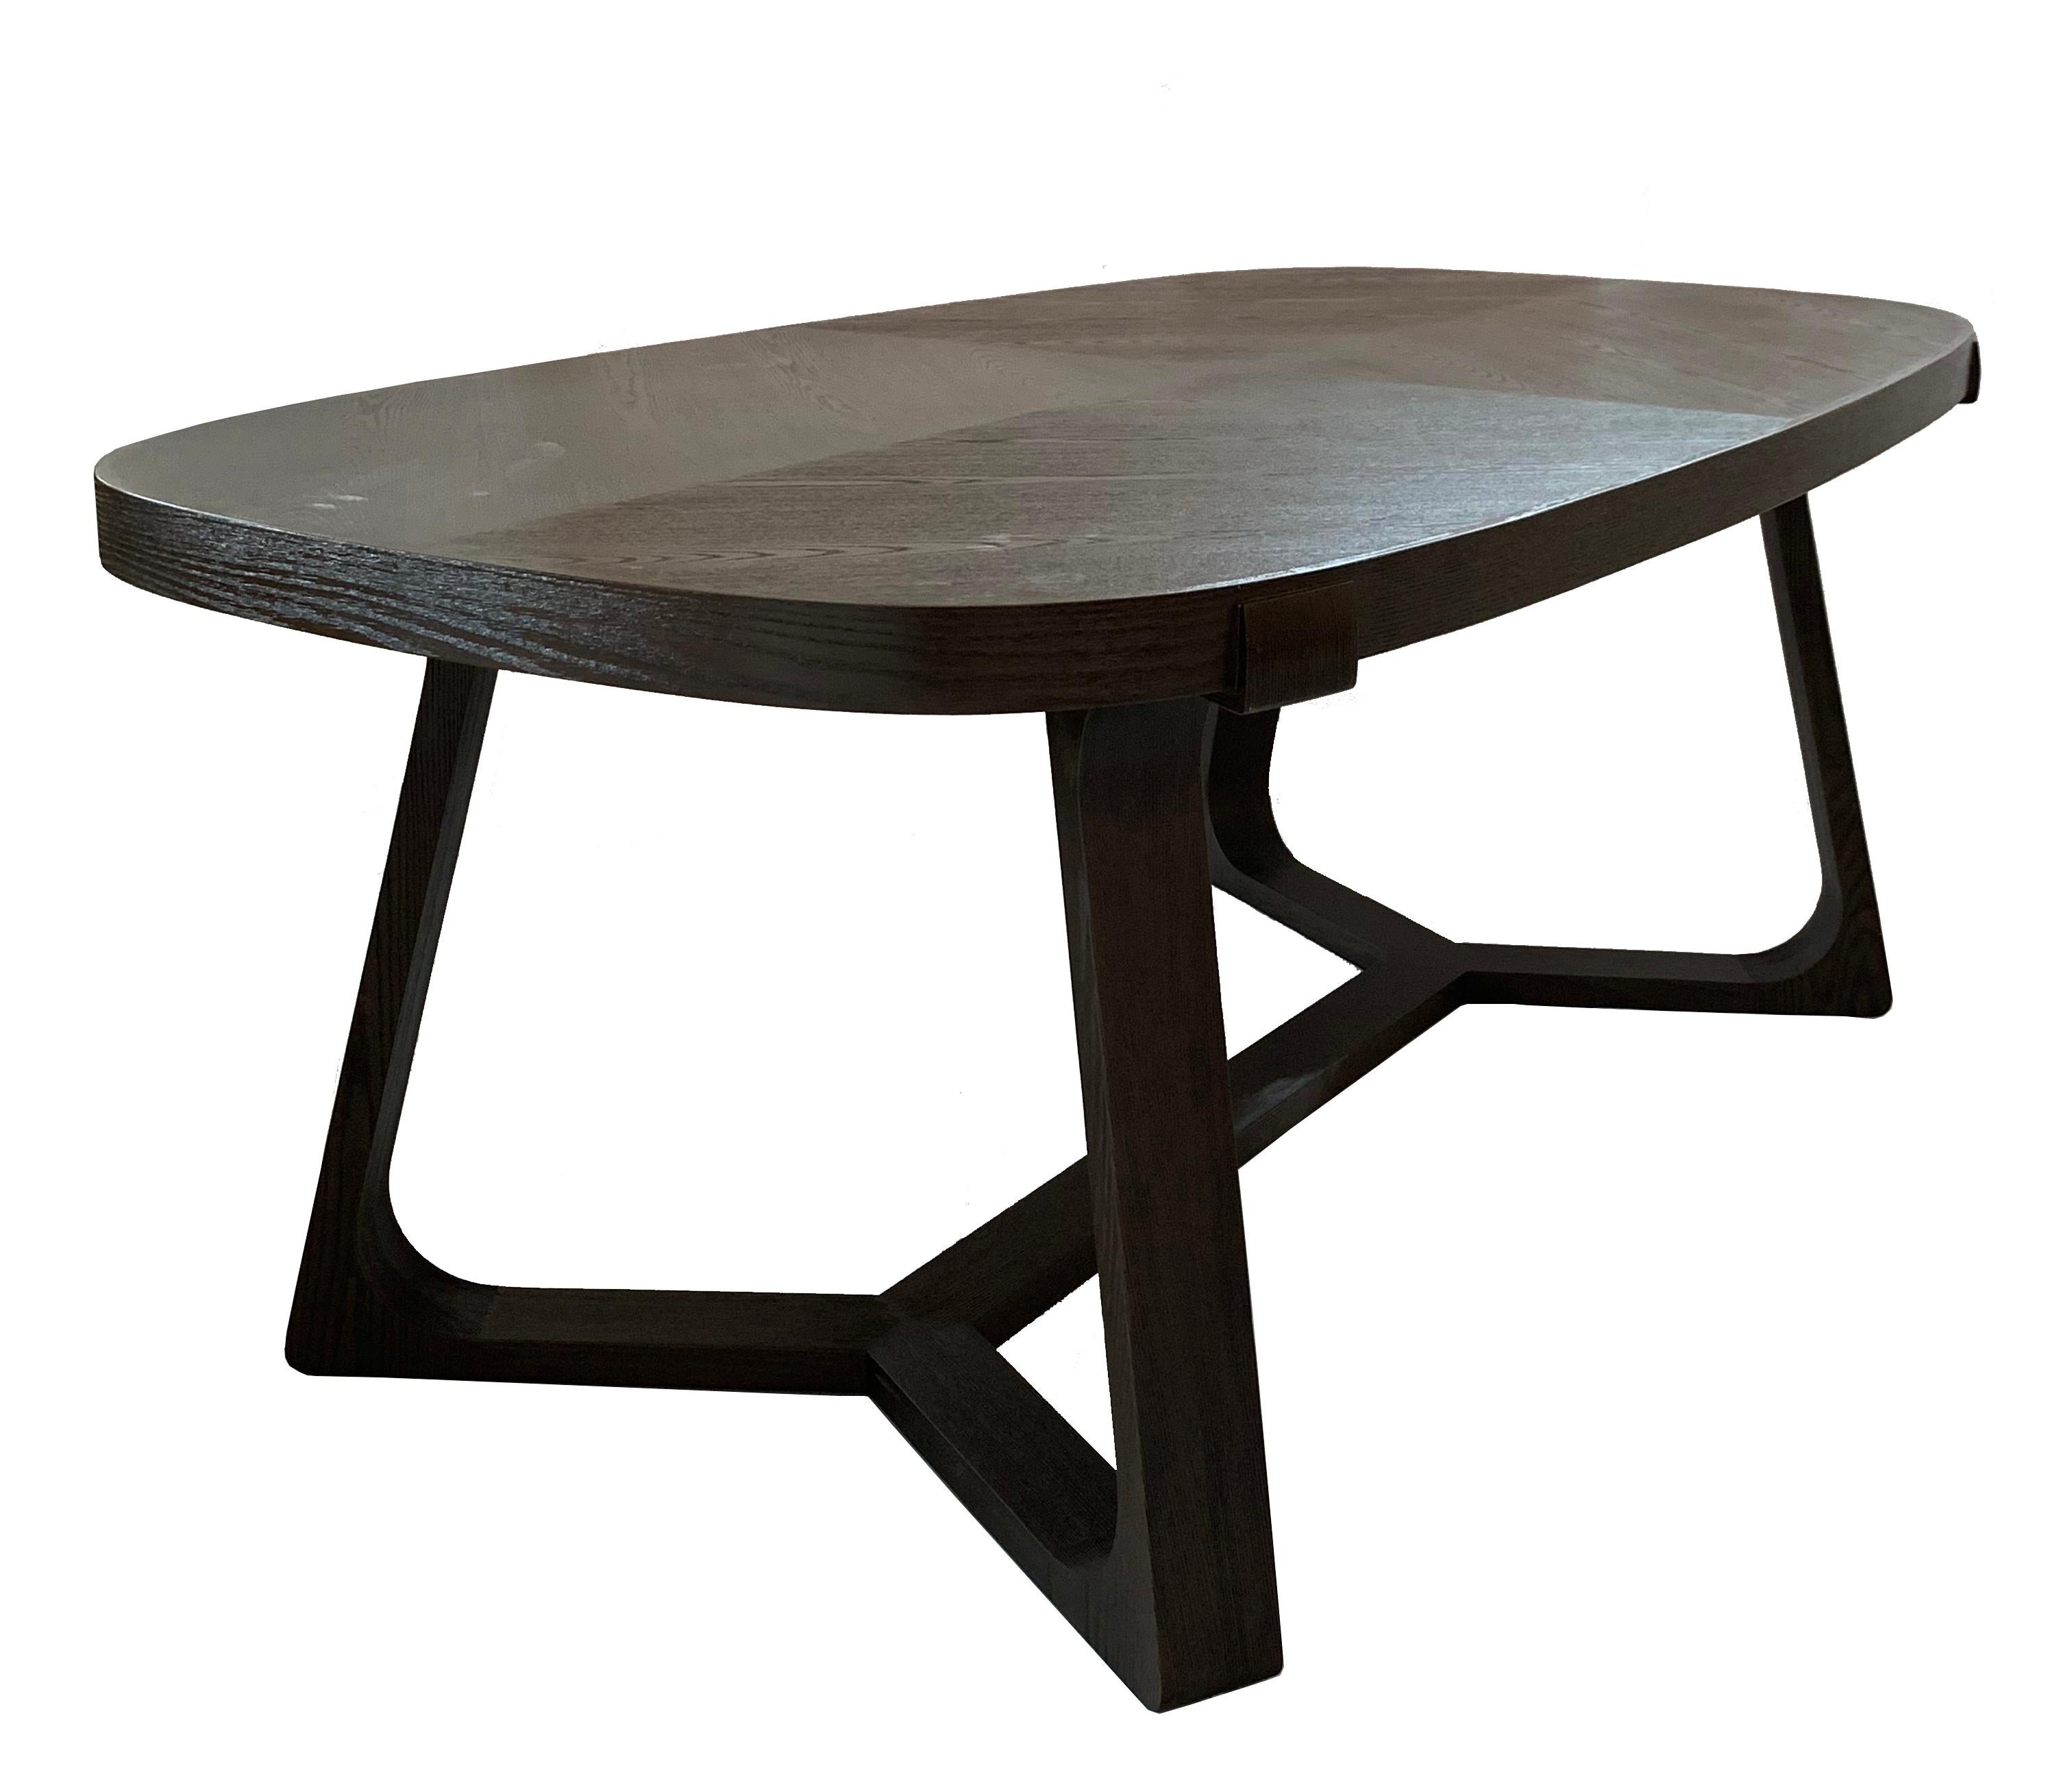 Wooden oval dining table, solid oak legs, oak veneer top.
Customisable size upon request.
Available in grey oak color too, upon request.
Suitable for 6 people.

Description: Oval dining table 200
Color: Brown
Size: 200 x 100 x 73H cm
Material: